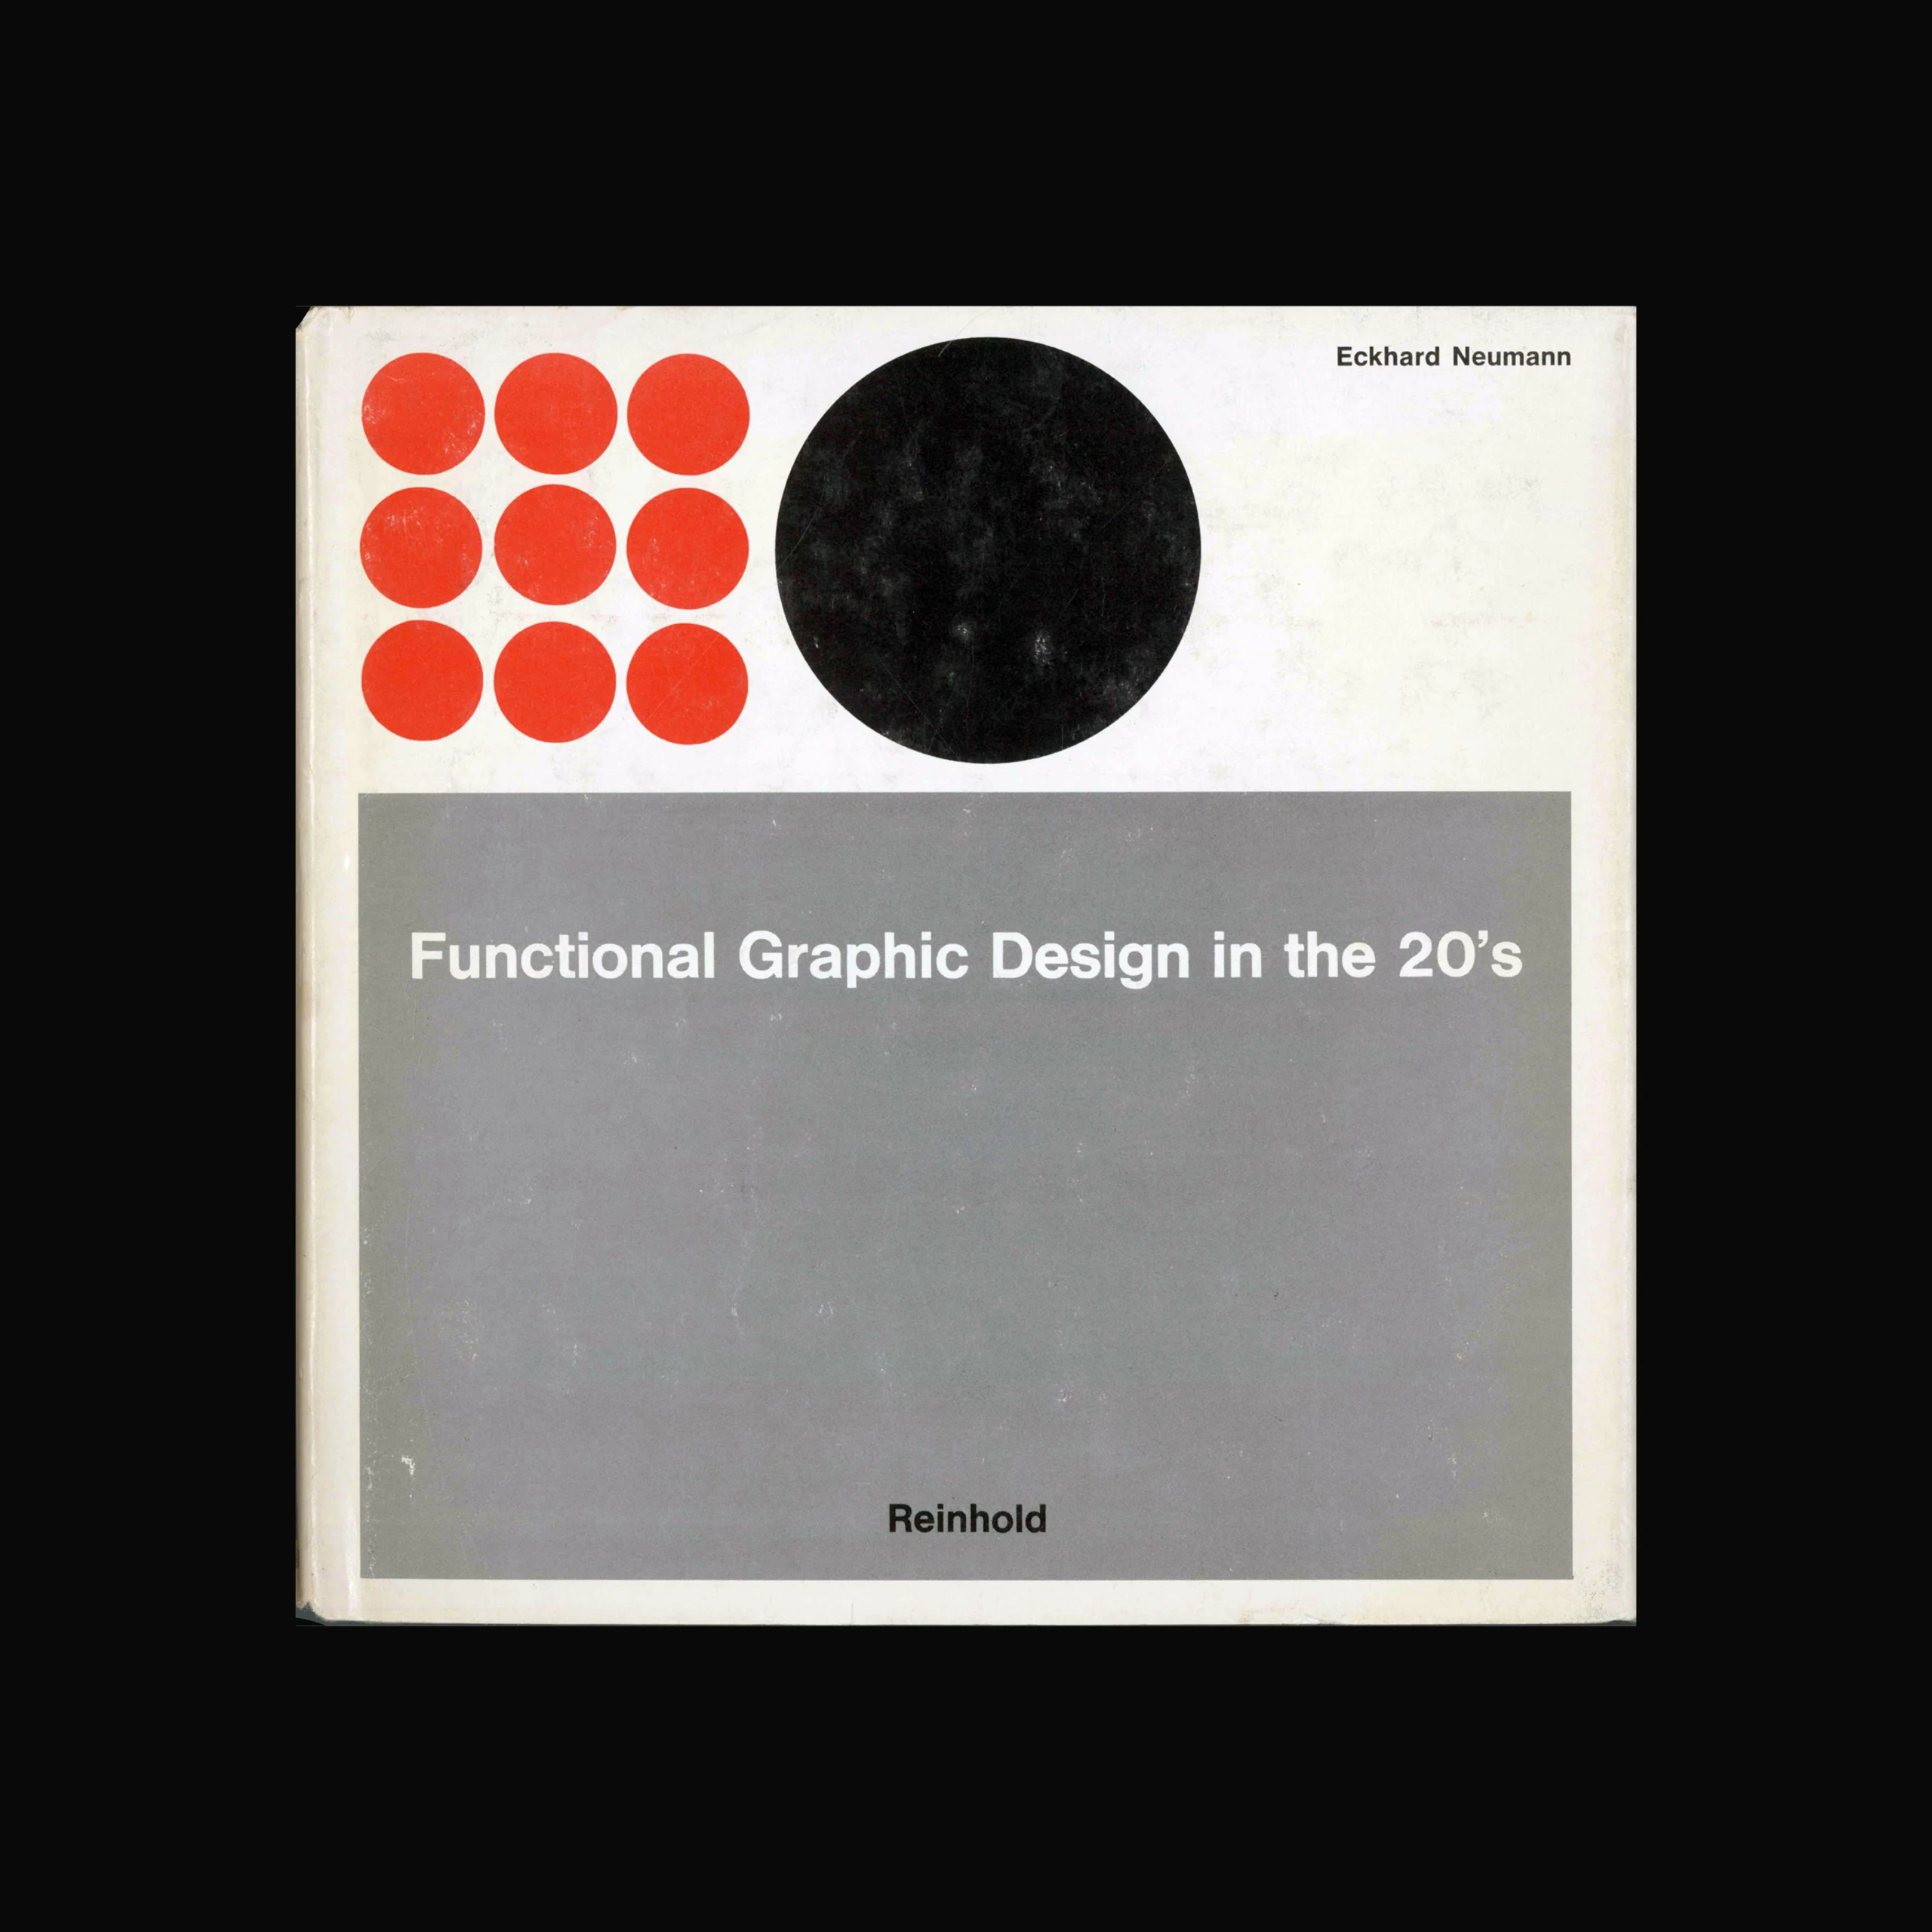 Functional Graphic Design in the 20's, Eckhard Neumann, 1967